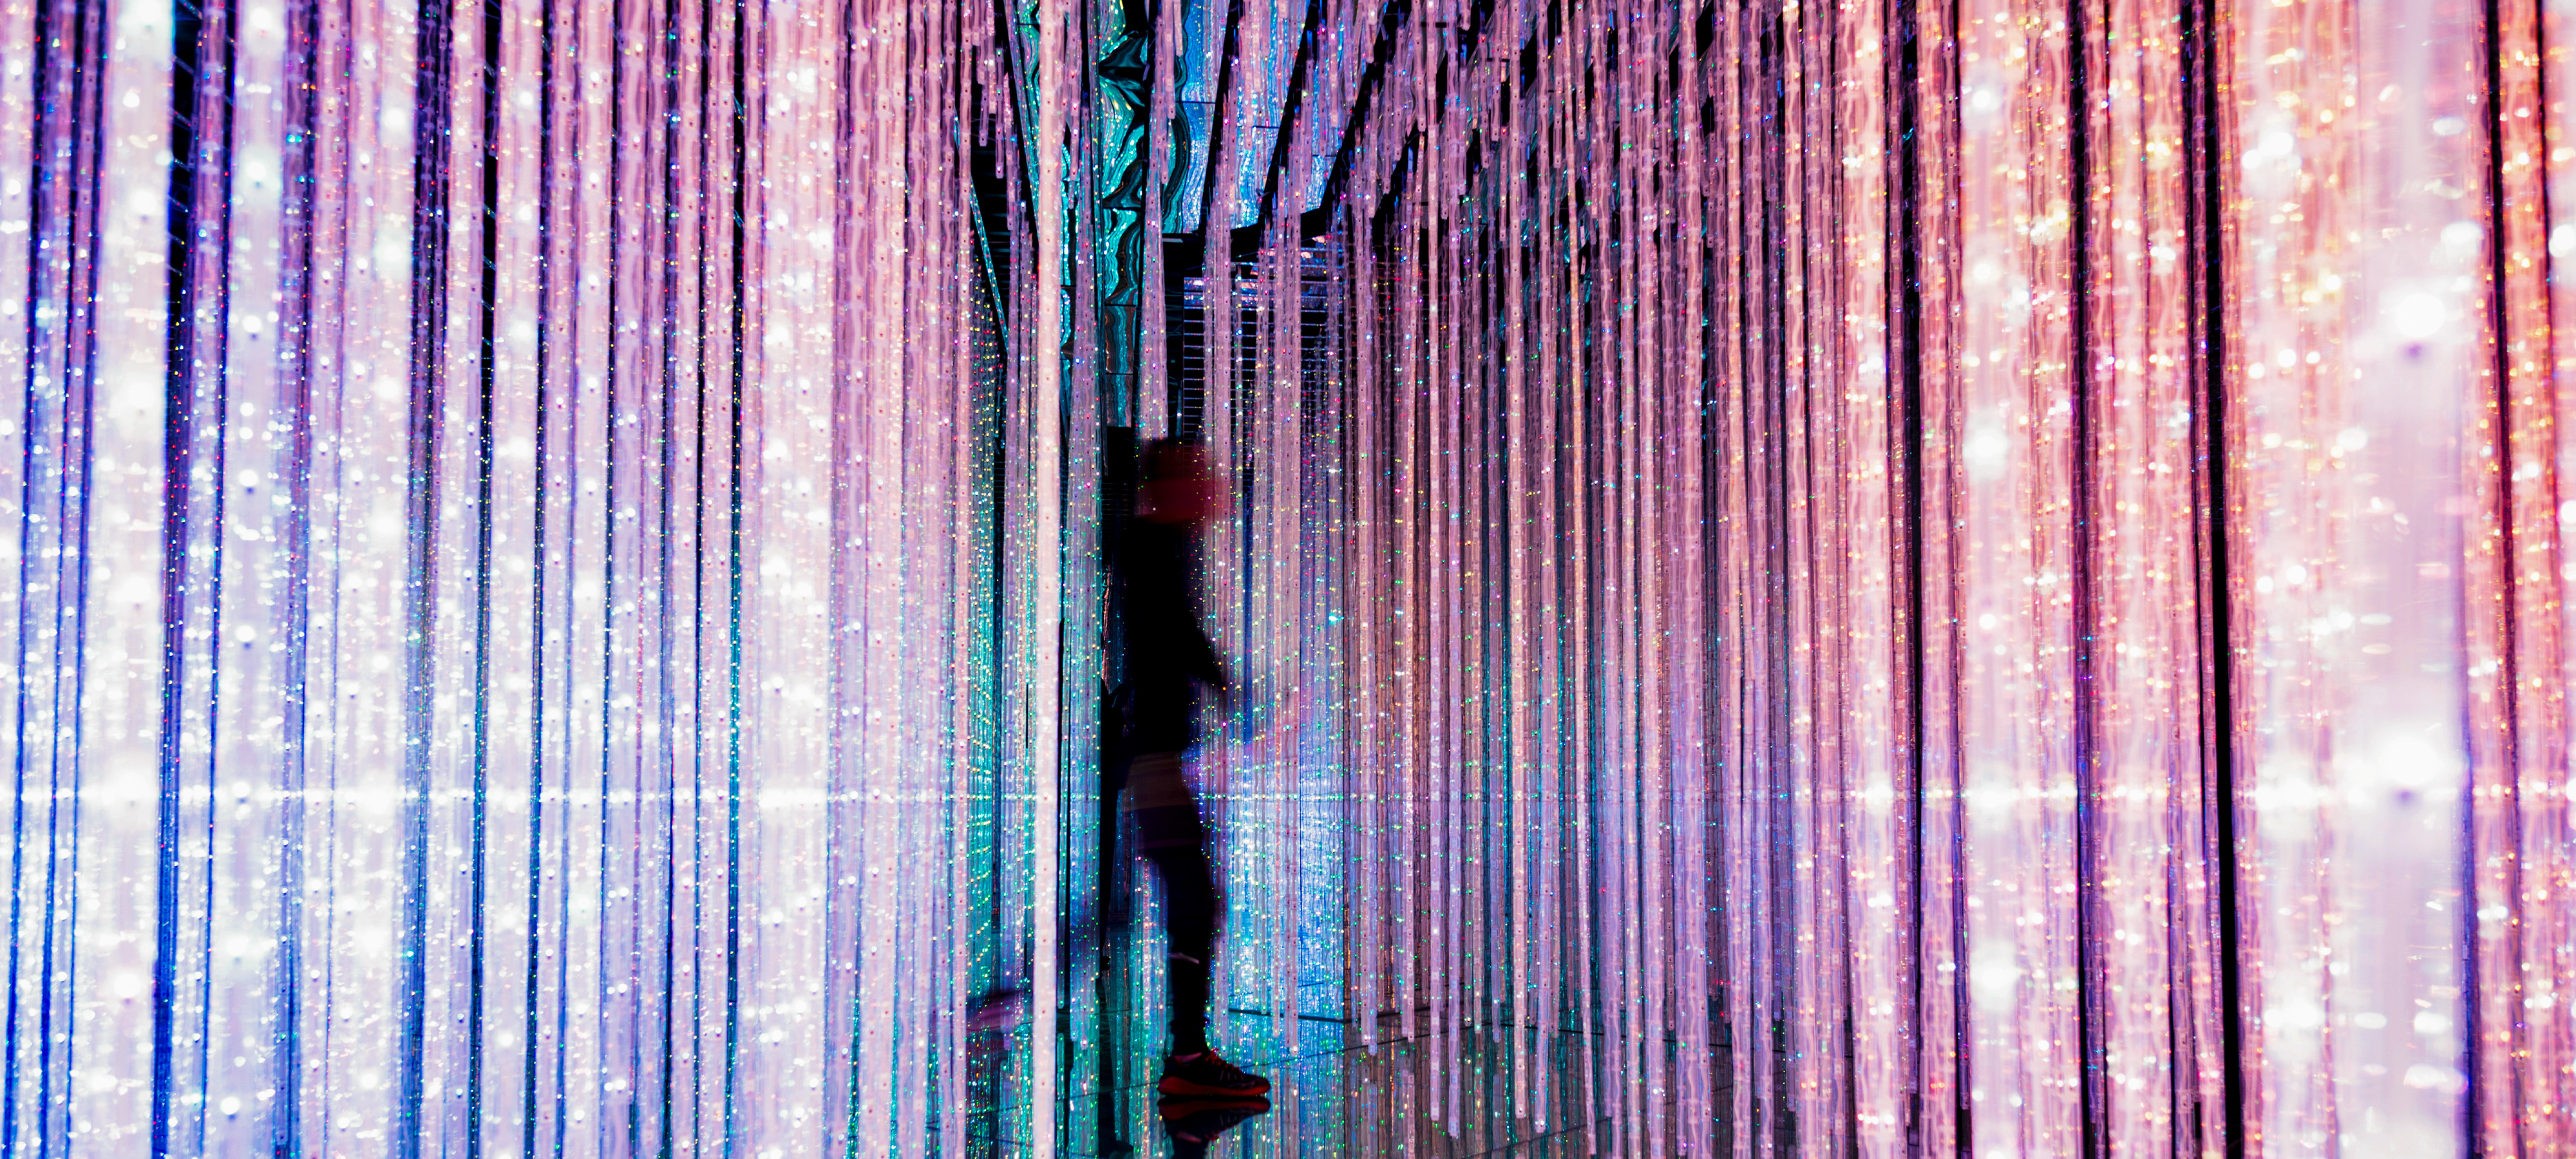 A blurry male figure walks through colorful strips of bright, sparkling lights. The lights cascade from the ceiling to the floor.